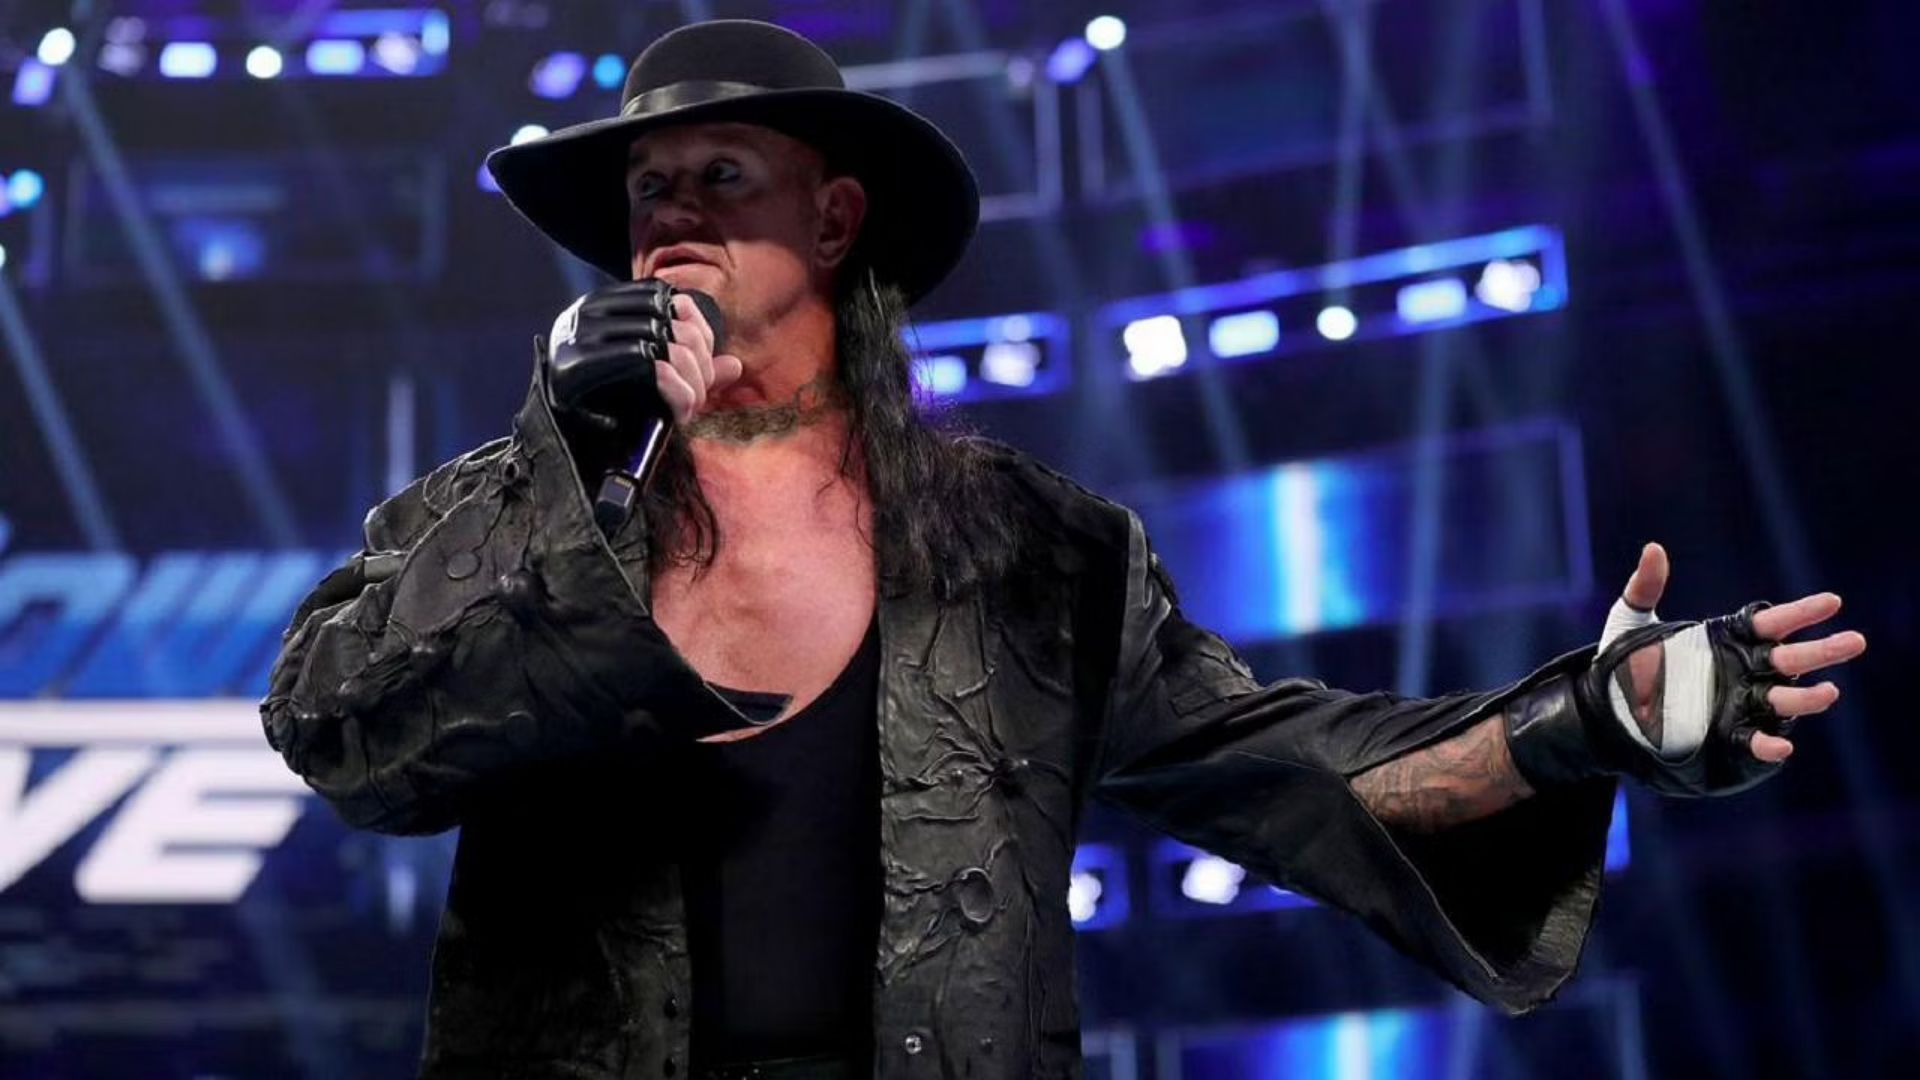 The Undertaker reveals that he his permanently retired from WWE